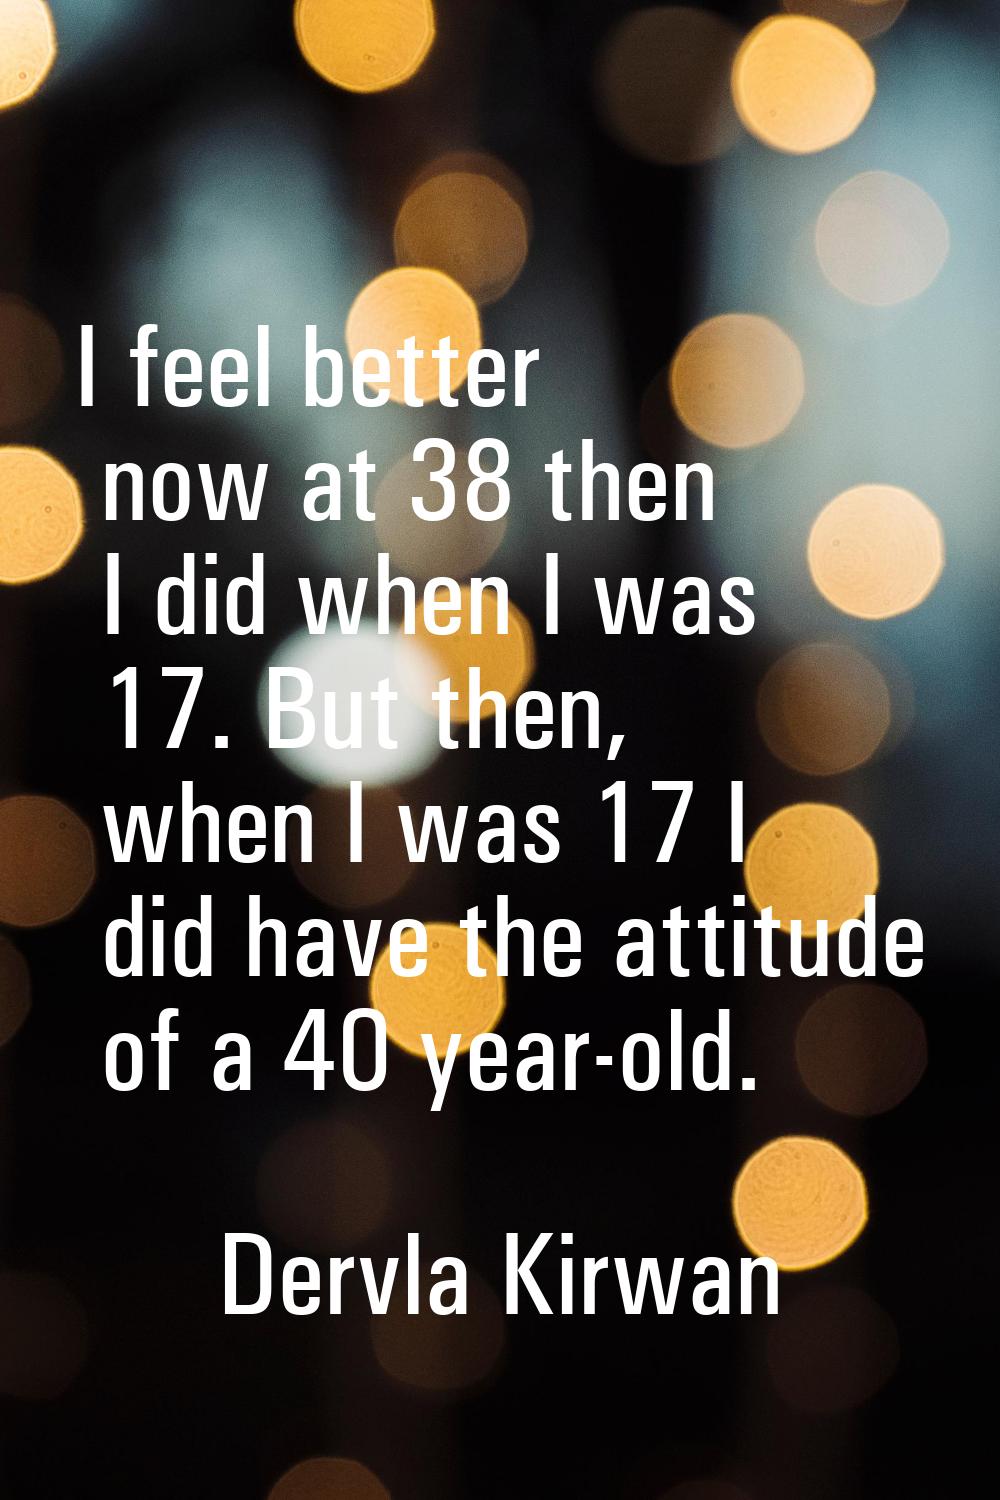 I feel better now at 38 then I did when I was 17. But then, when I was 17 I did have the attitude o